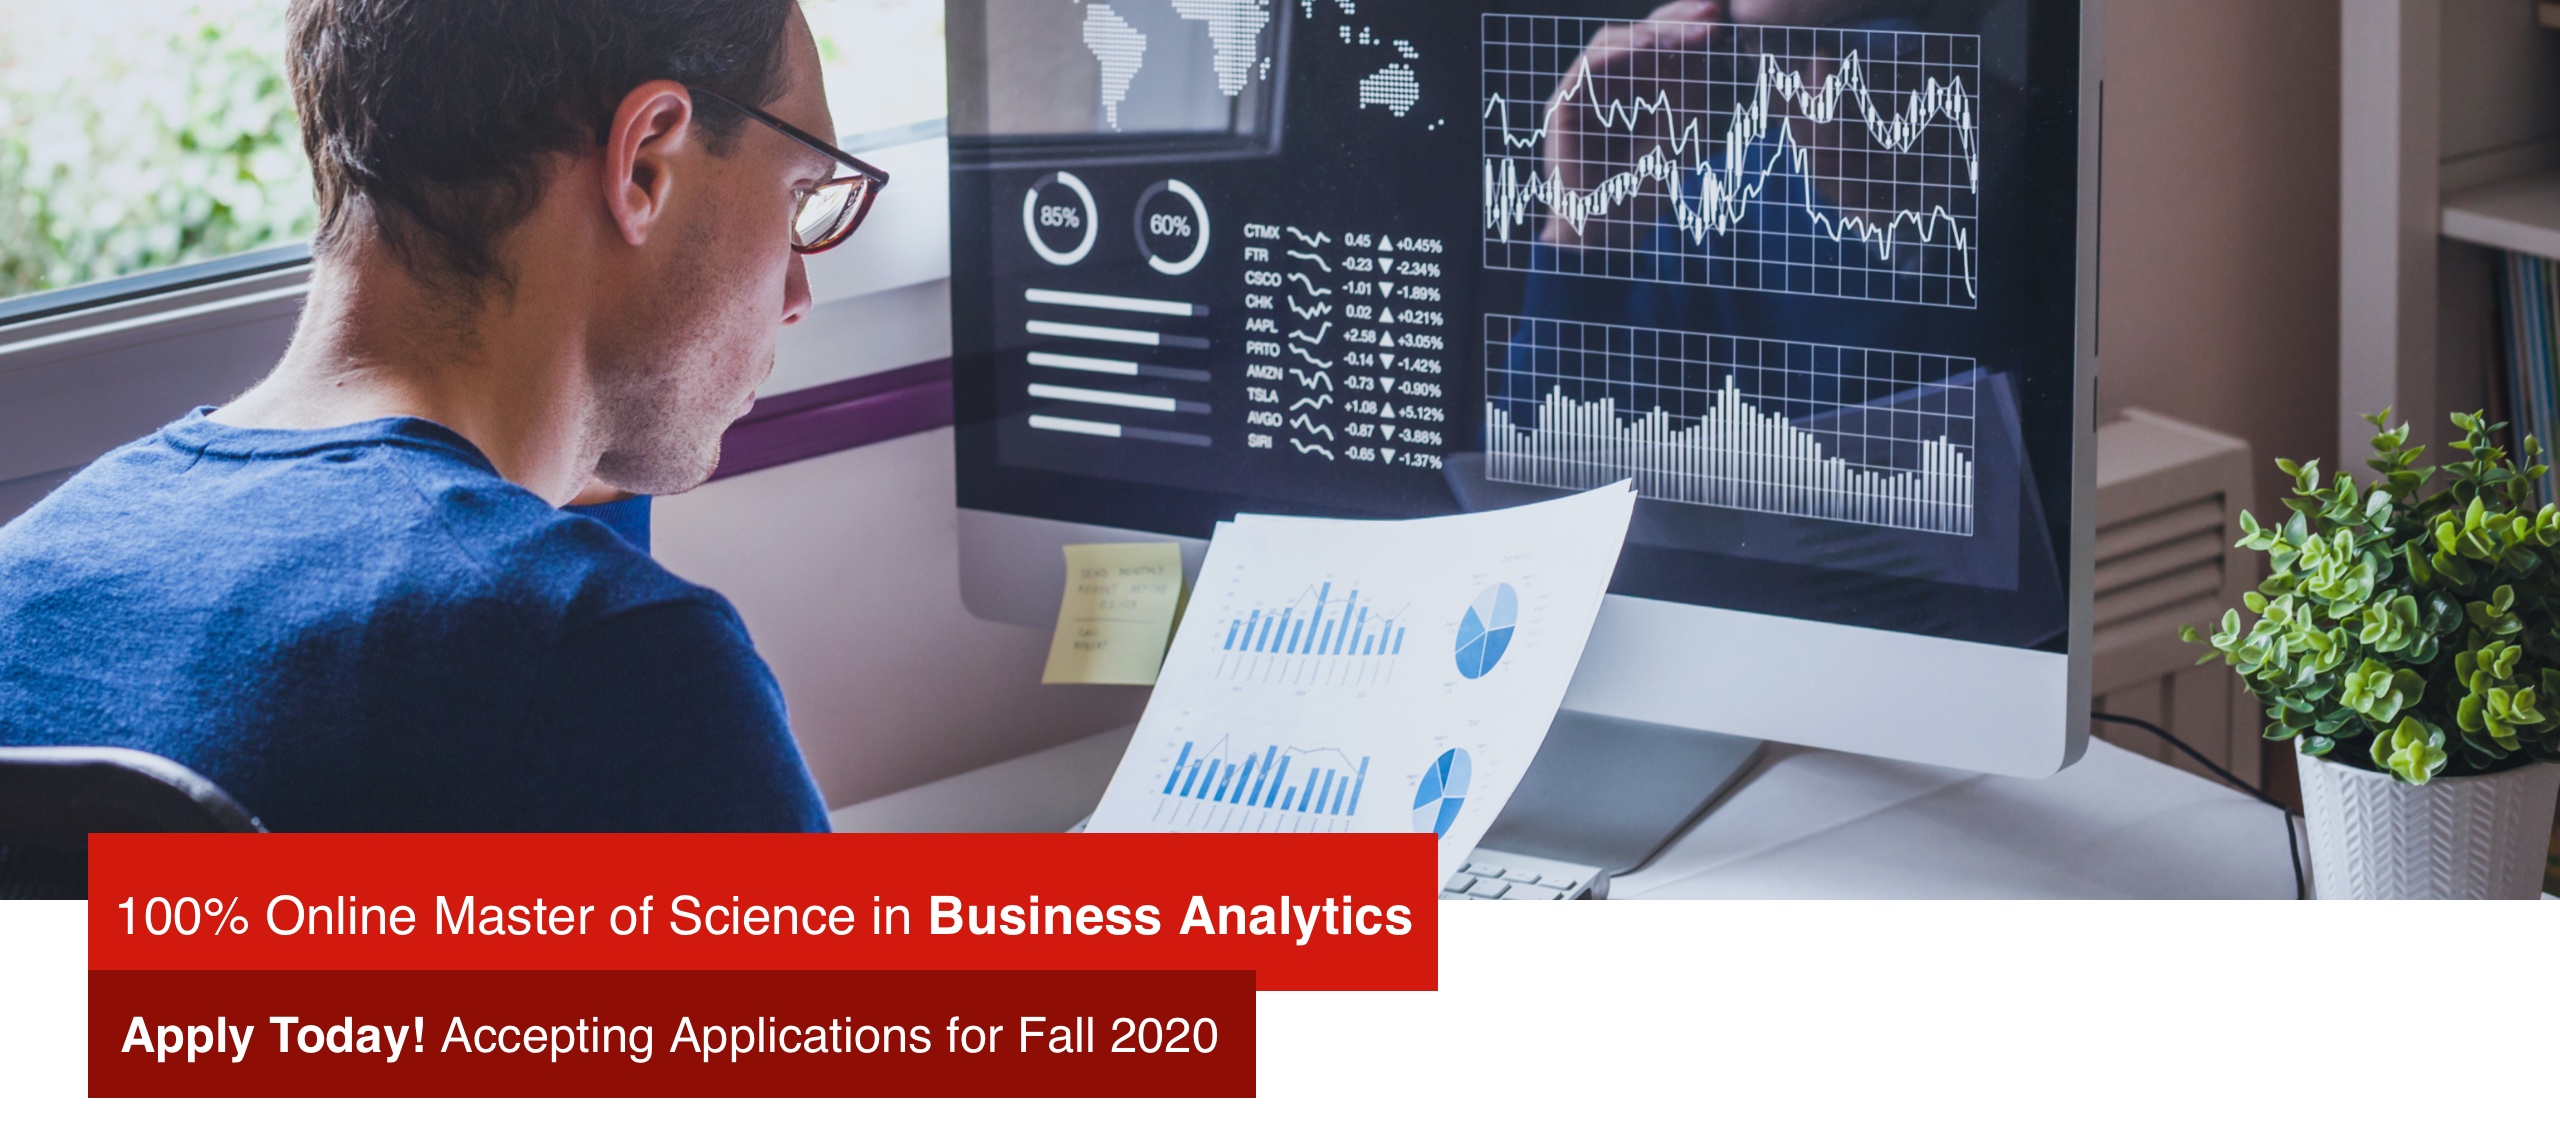 Online Master of Science in Business Analytics Montclair State University